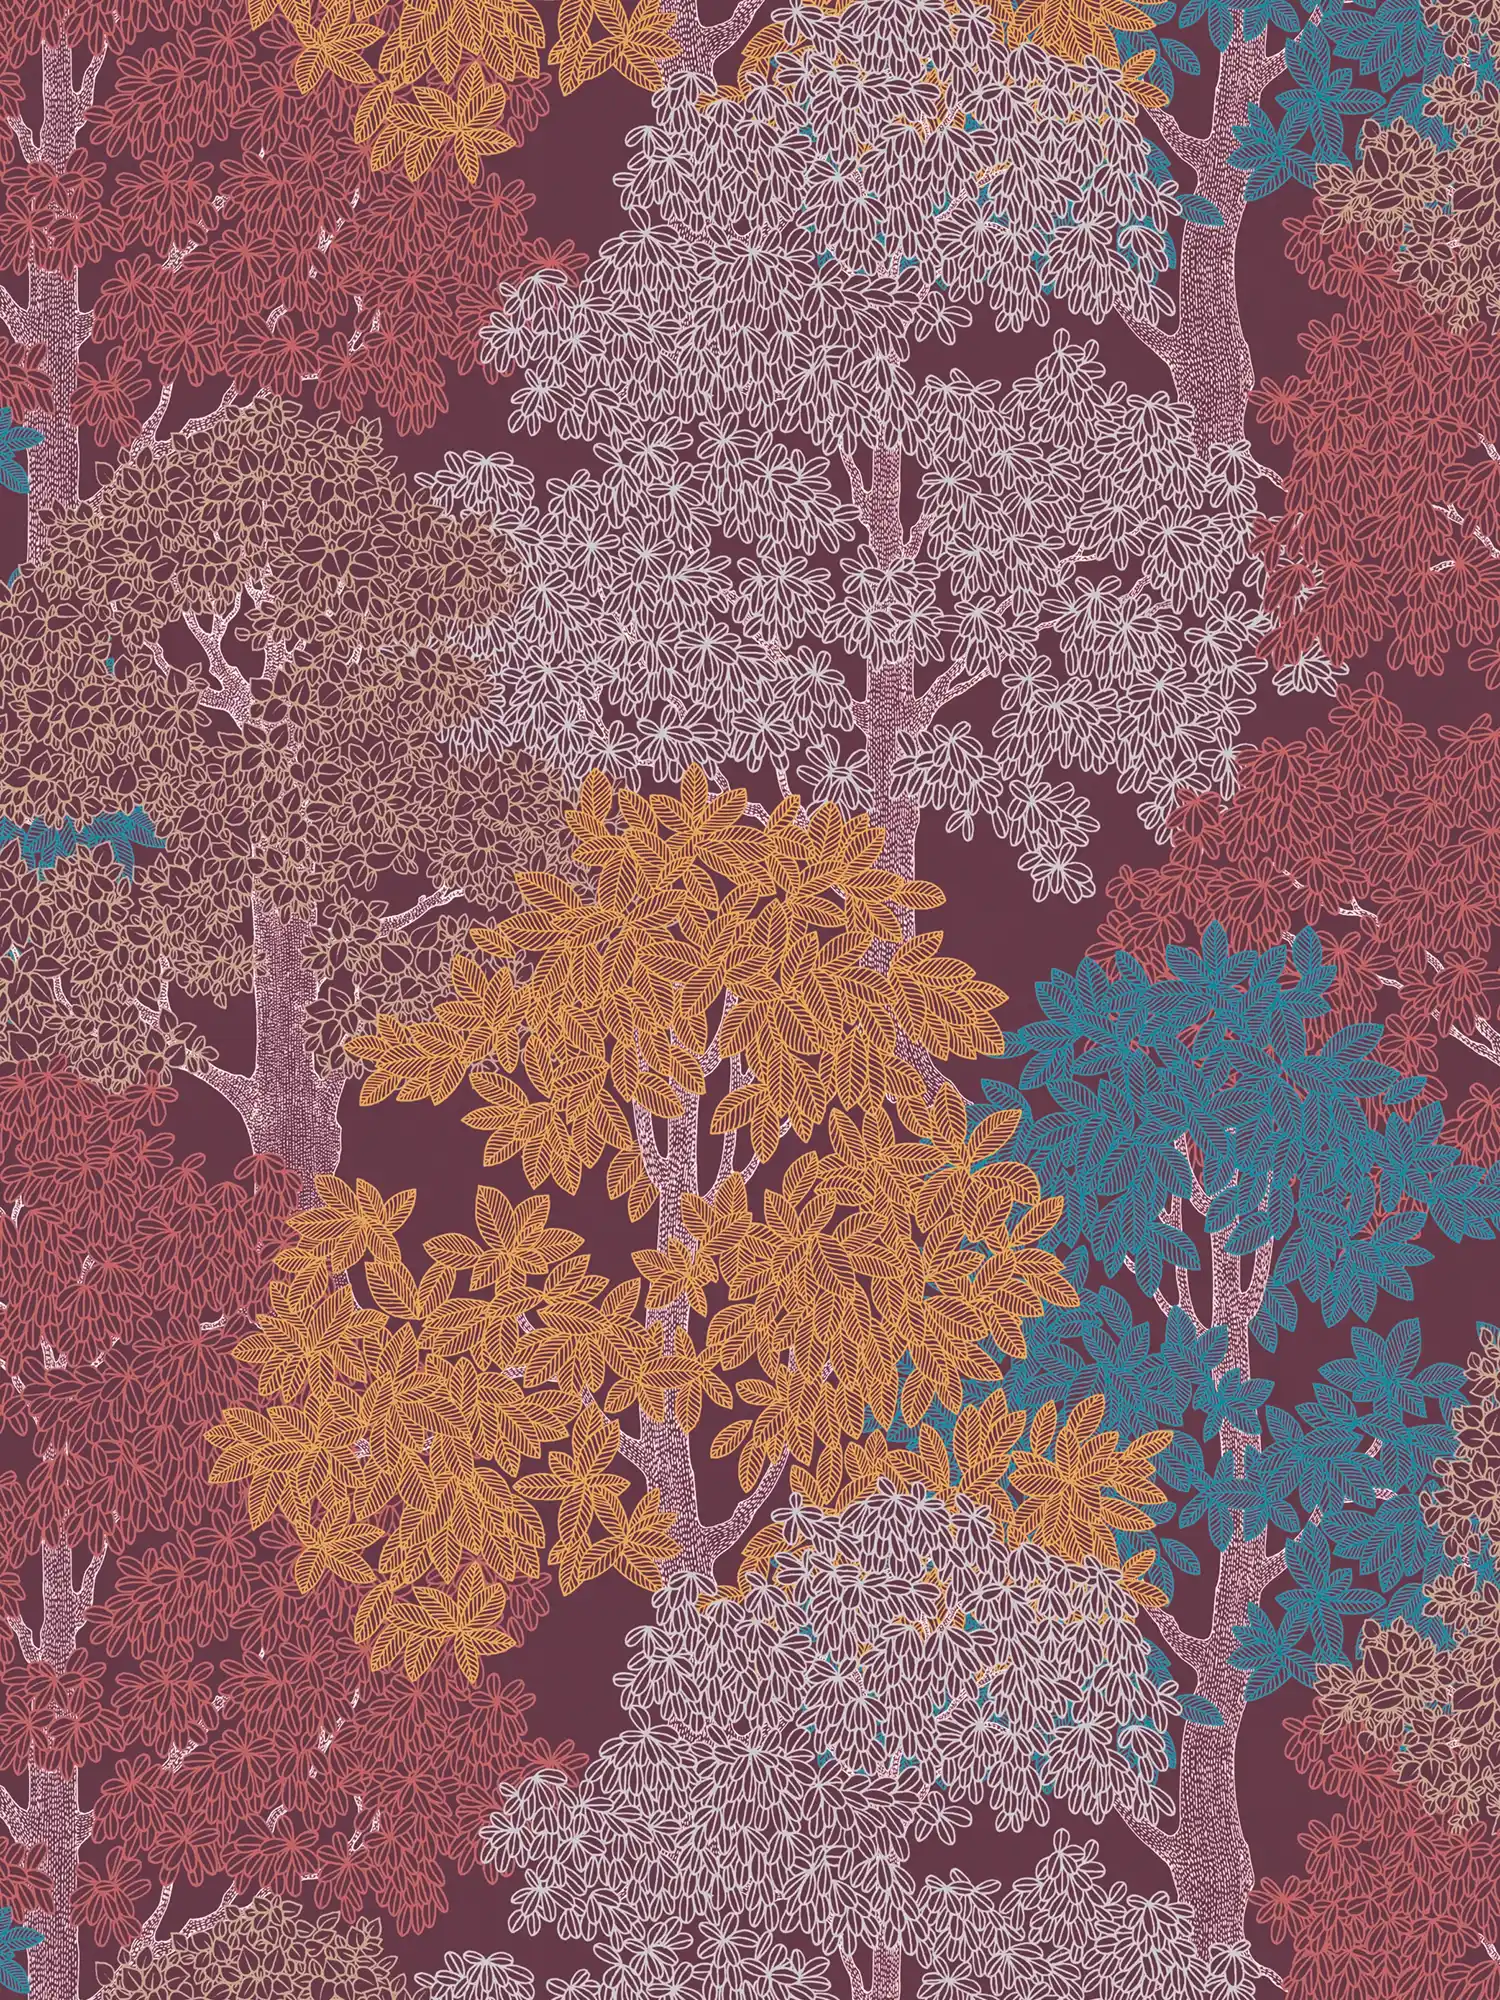         Wallpaper wine red with forest pattern & trees in drawing style - purple, red, yellow
    